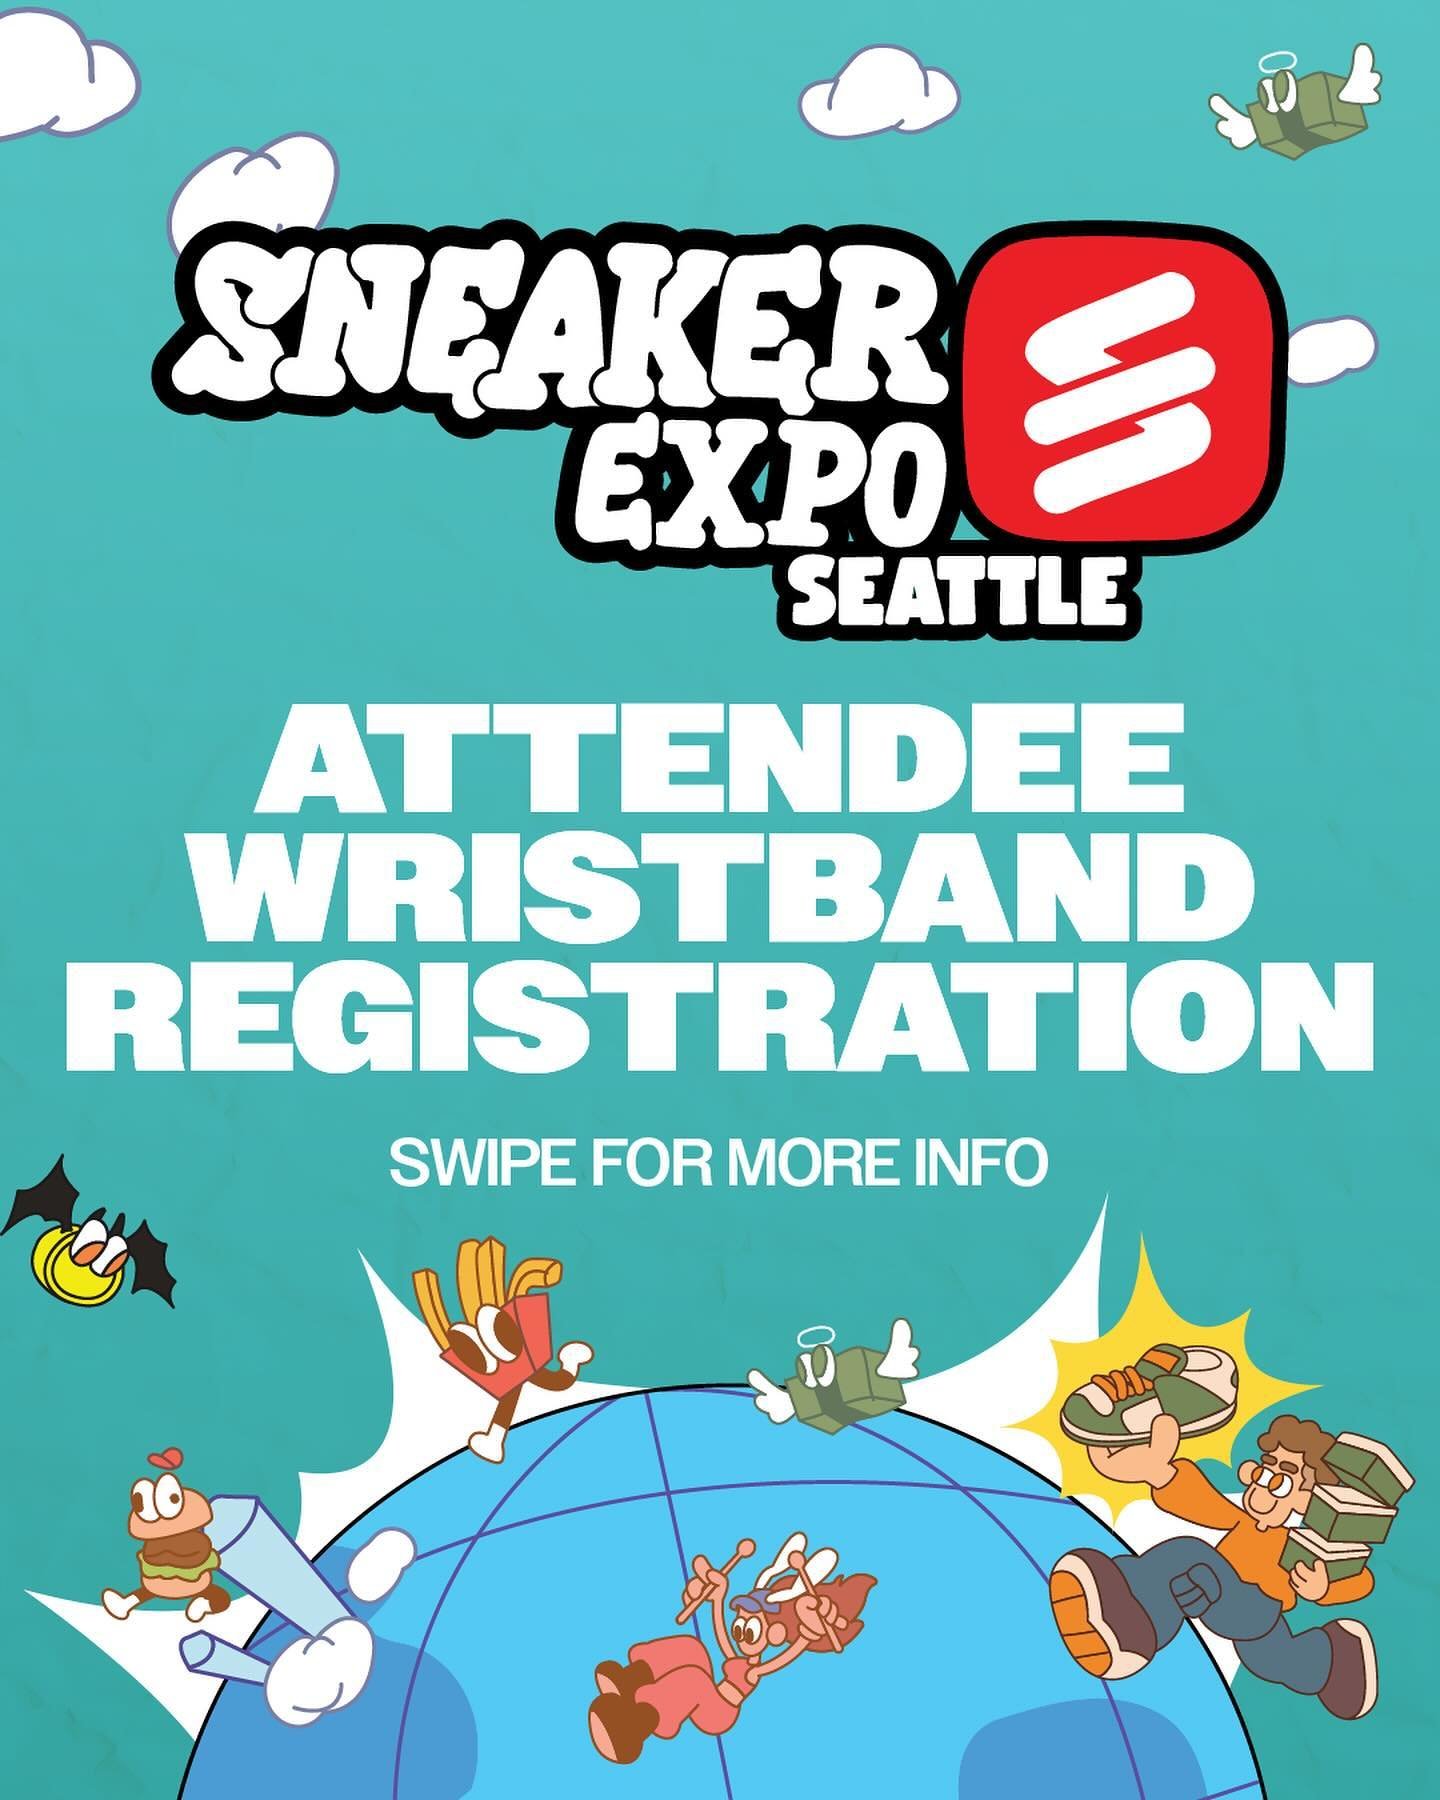 🚨 WRISTBAND INFO 🚨 

Bring your tickets over to 800 Pike for your wristbands!
They&rsquo;ll be available for pick up on Friday (Day 0) and day of the event! So if you wanna skip the line, come by during Day!

Please note that wristbands are require